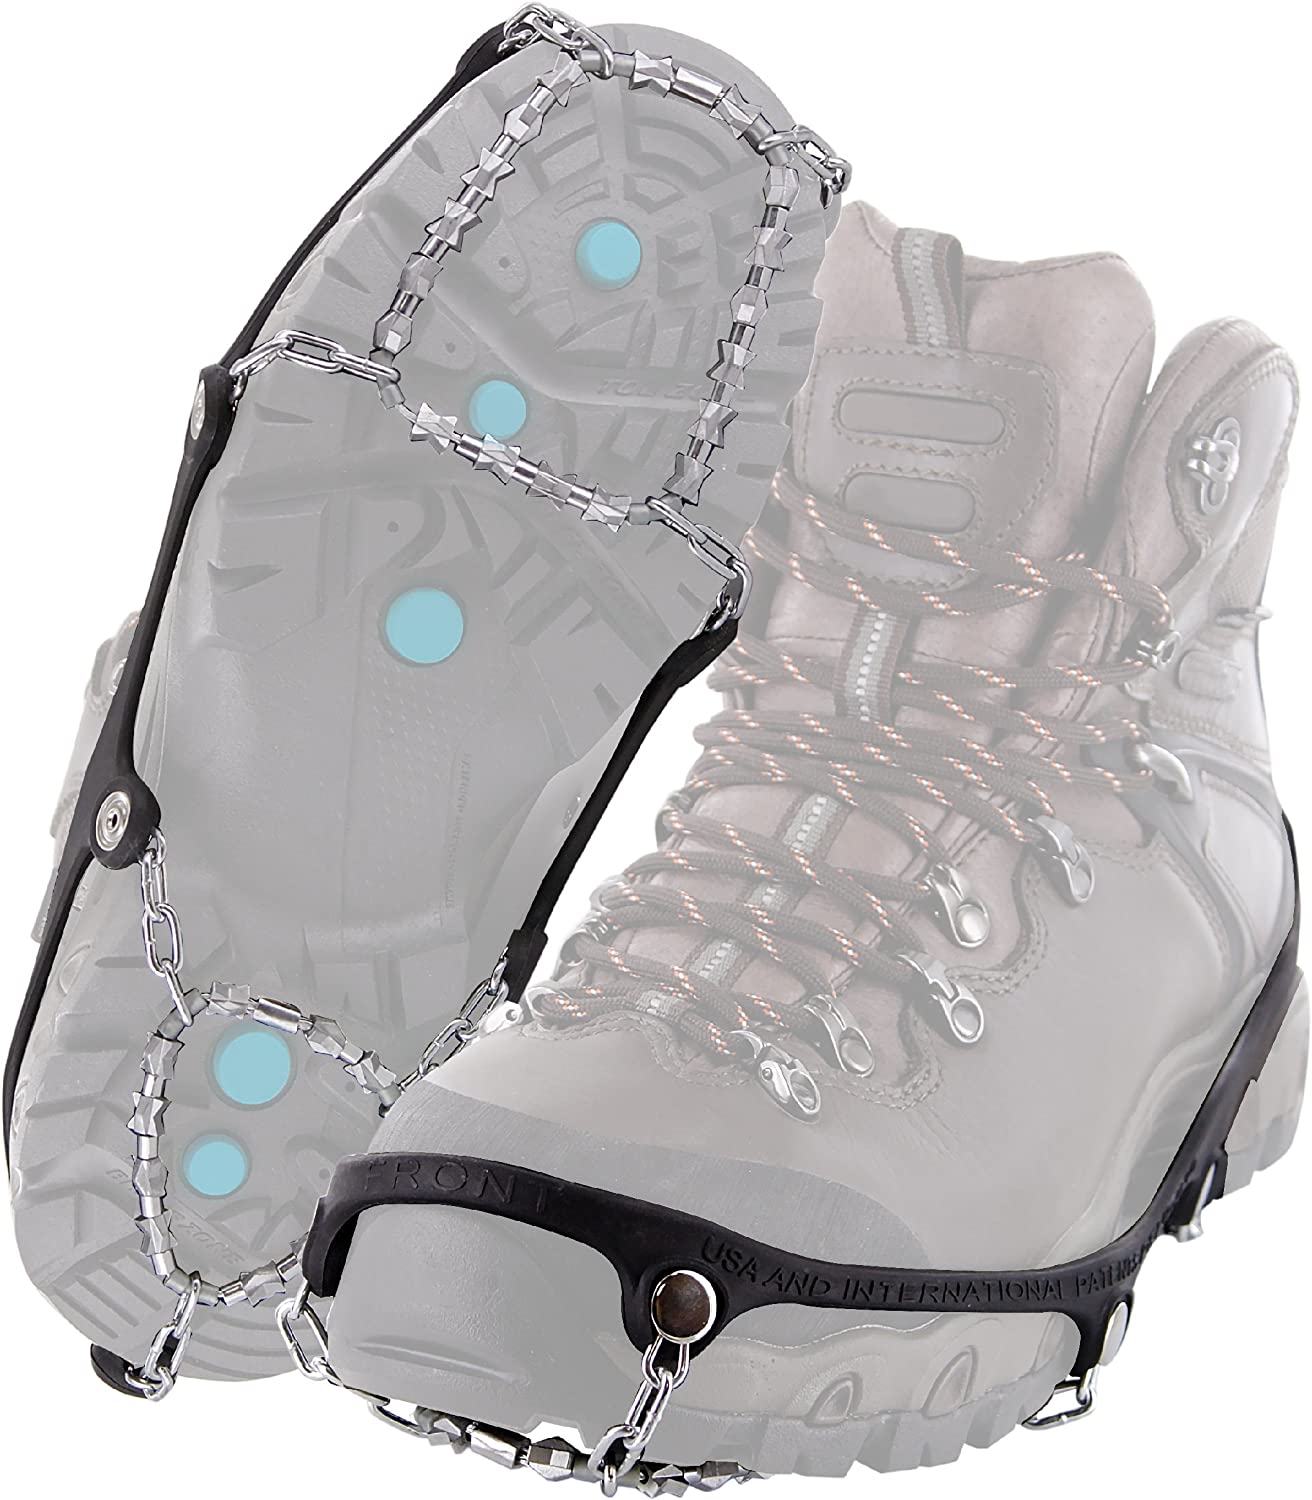 Best Ice Cleats For Elderly Yaktrax Diamond Grip All-Surface Traction Cleats for Walking on Ice and Snow (1 Pair)